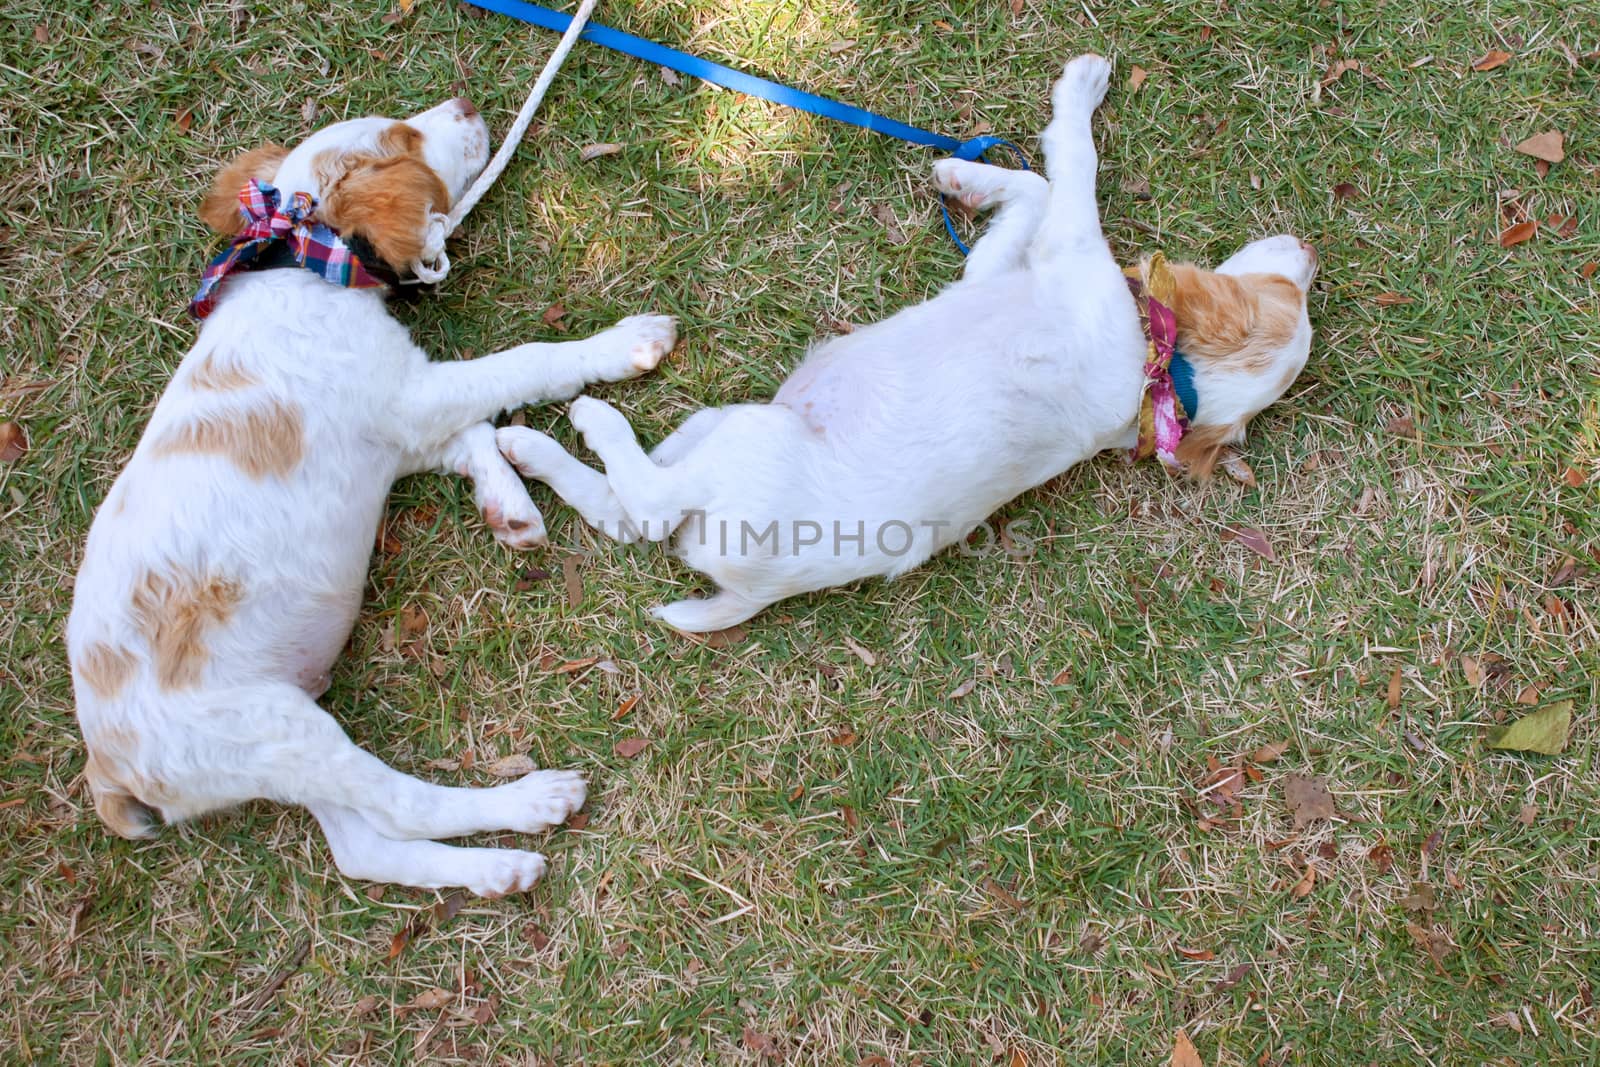 Two puppies take a nap on grass